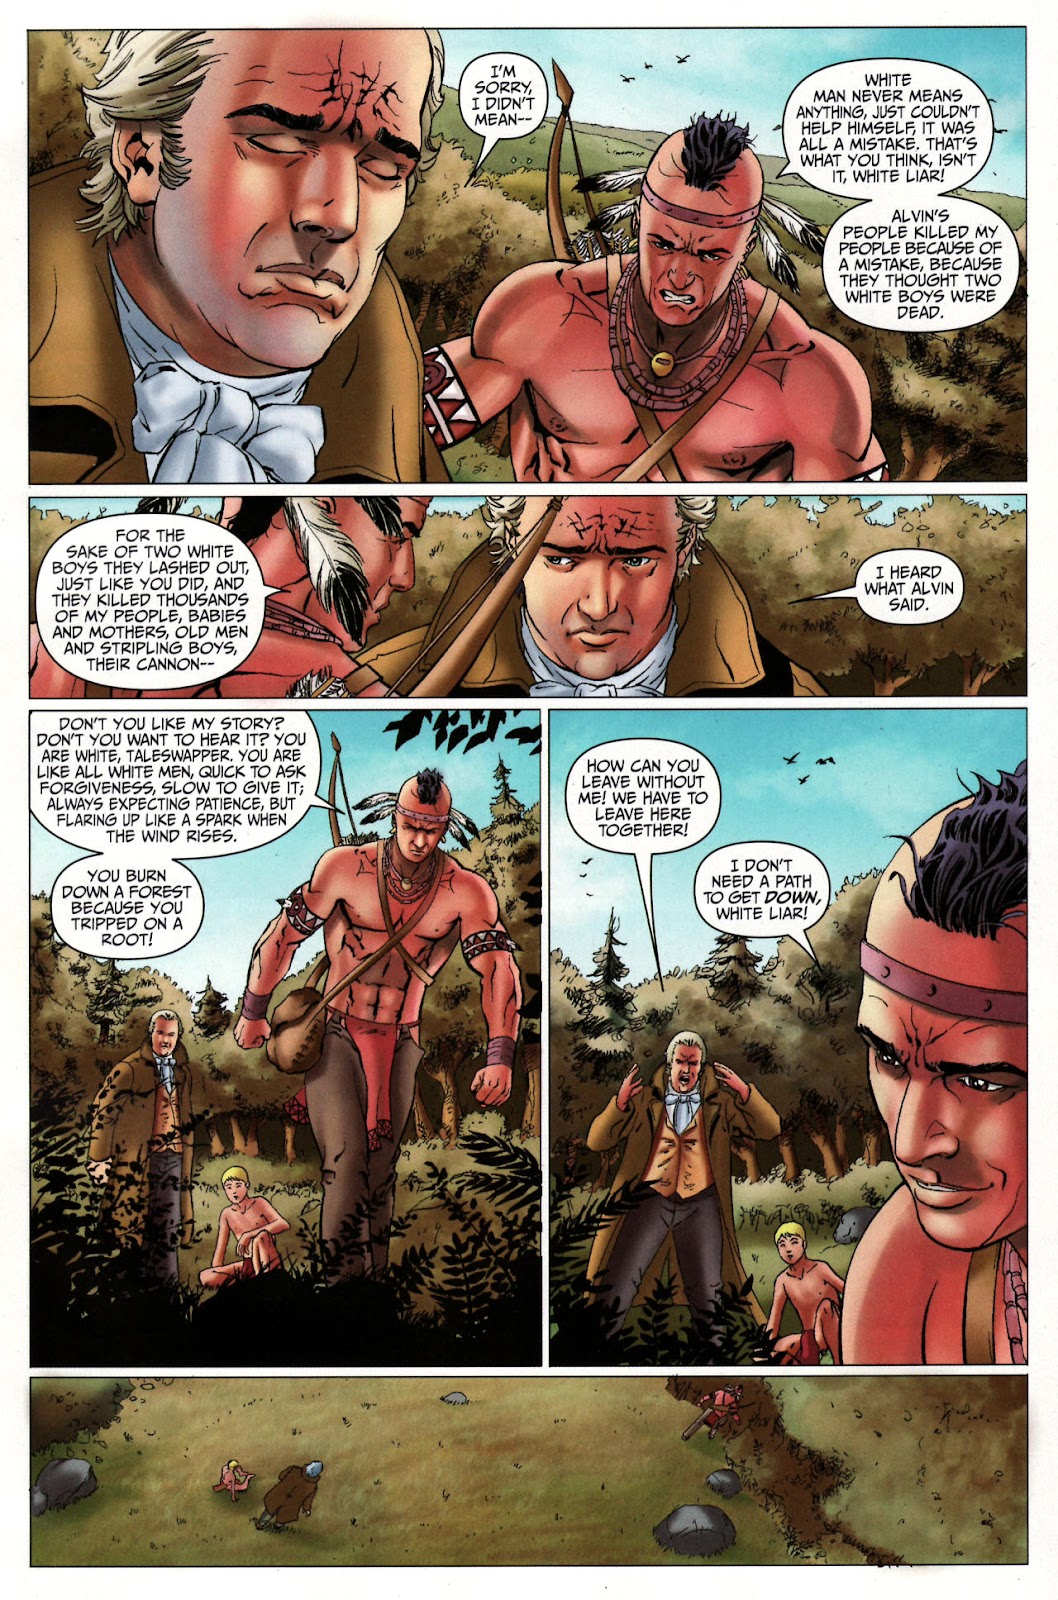 Red Prophet: The Tales of Alvin Maker issue 12 - Page 4